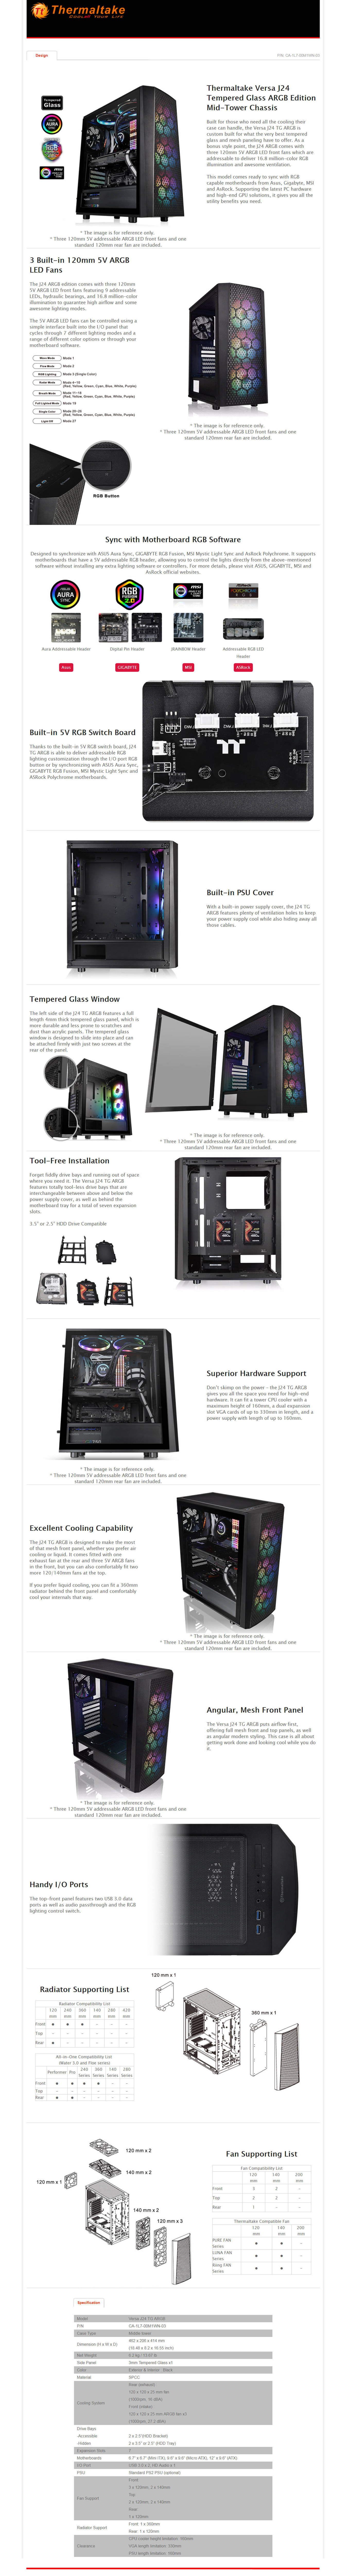  Buy Online Thermaltake Versa J24 Tempered Glass ARGB Edition Mid Tower Chassis (CA-1L7-00M1WN-03)